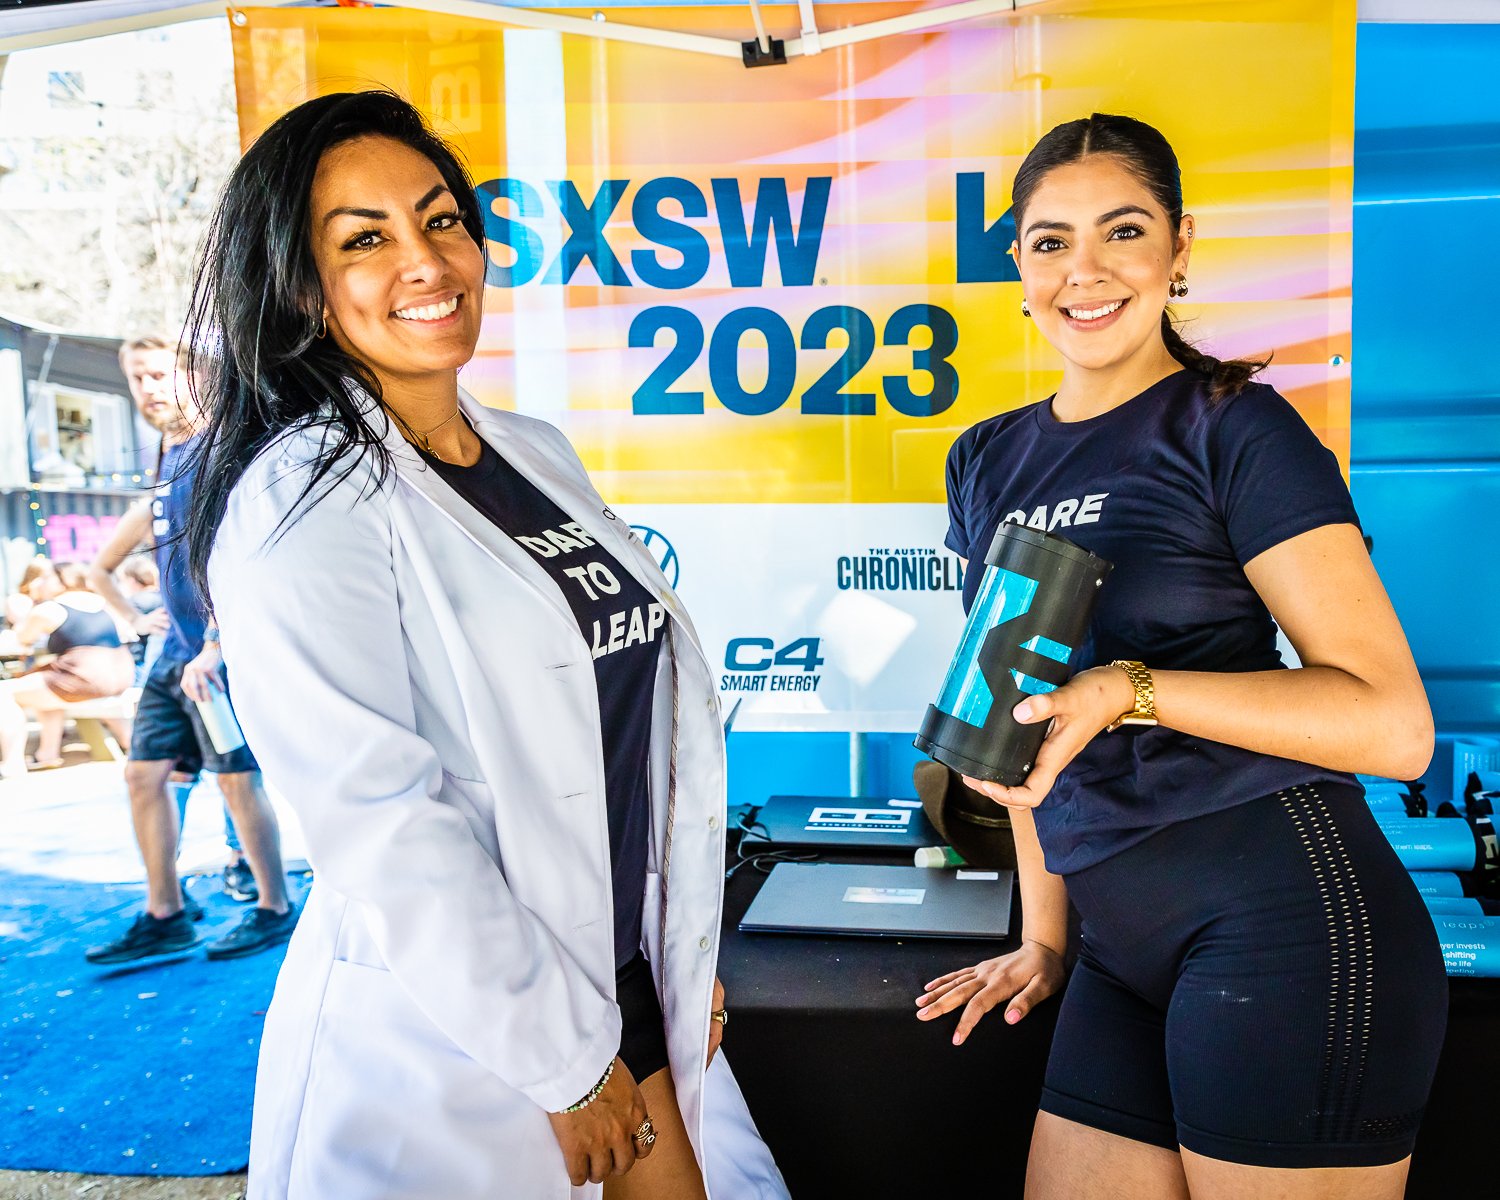 Event staffing and brand activation support for SXSW